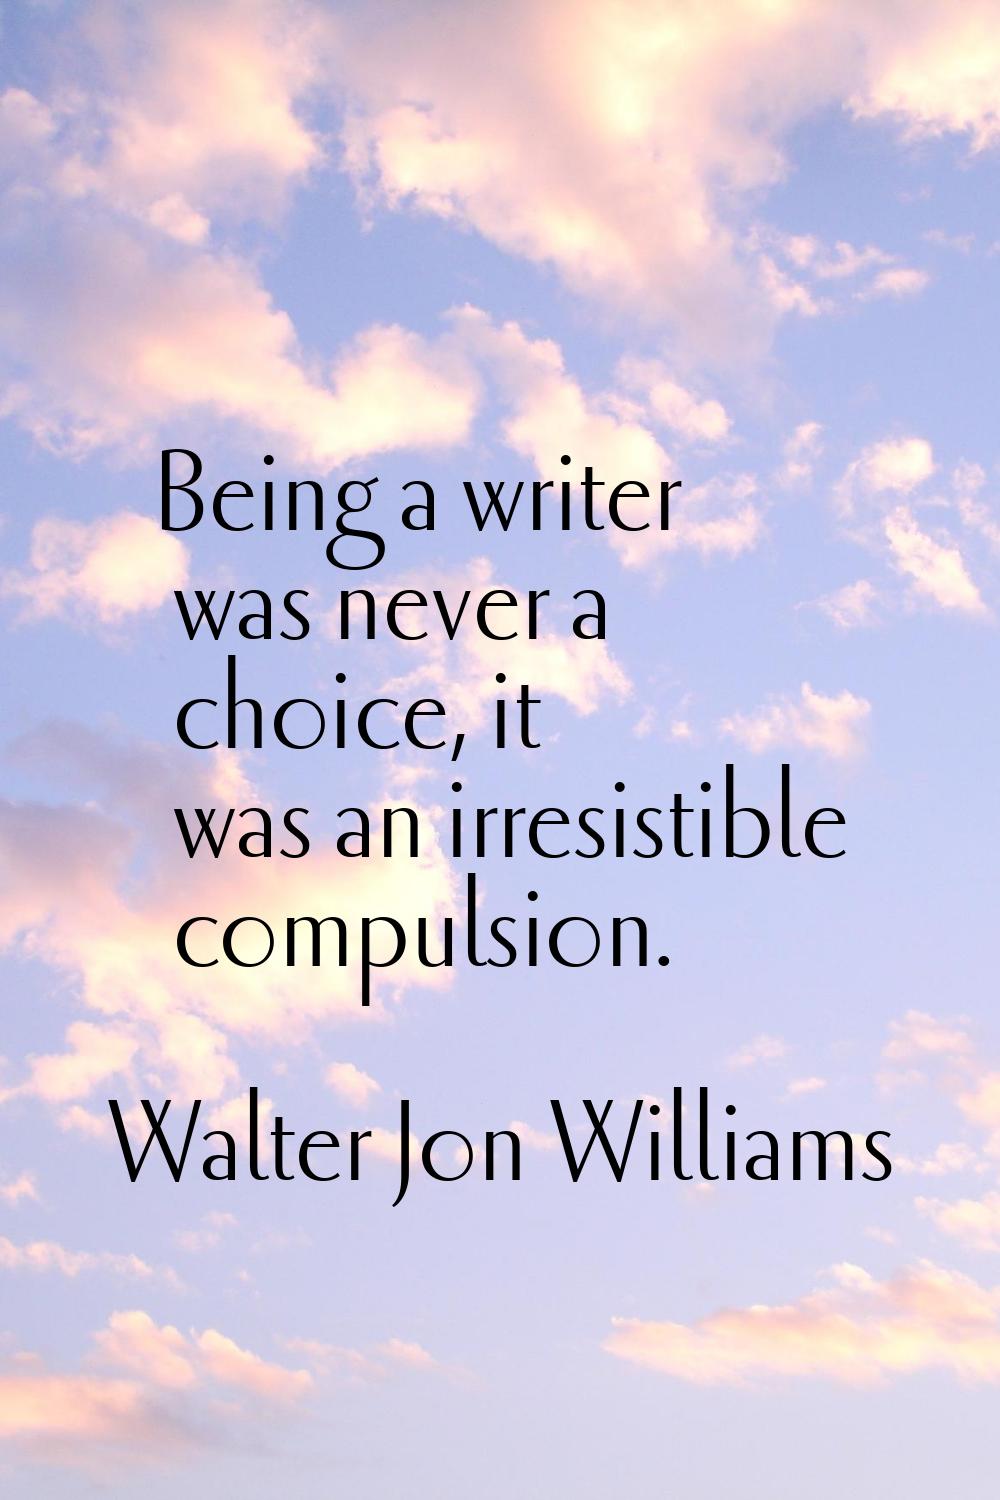 Being a writer was never a choice, it was an irresistible compulsion.